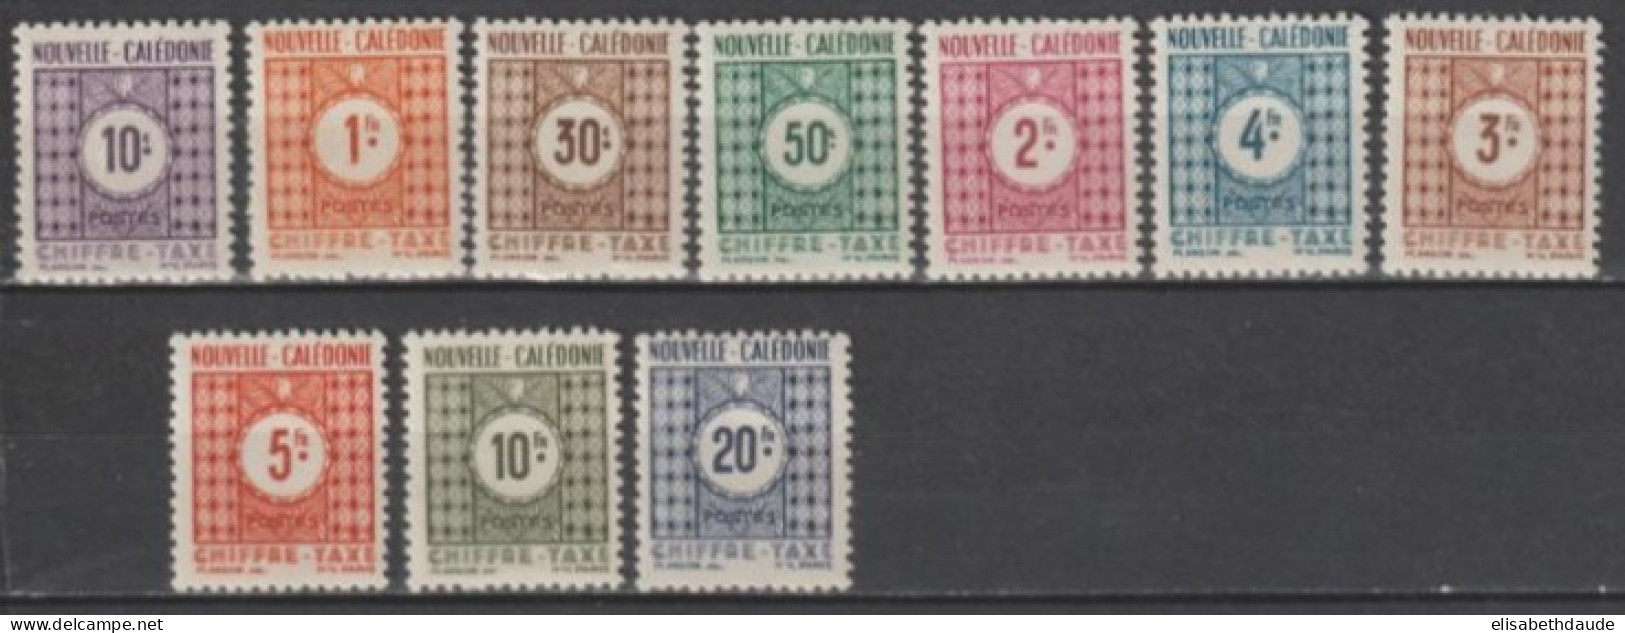 NOUVELLE CALEDONIE - 1948 - TAXE SERIE COMPLETE YVERT N°26/38 * MH  - COTE Pour * = 13 EUR - Nuovi